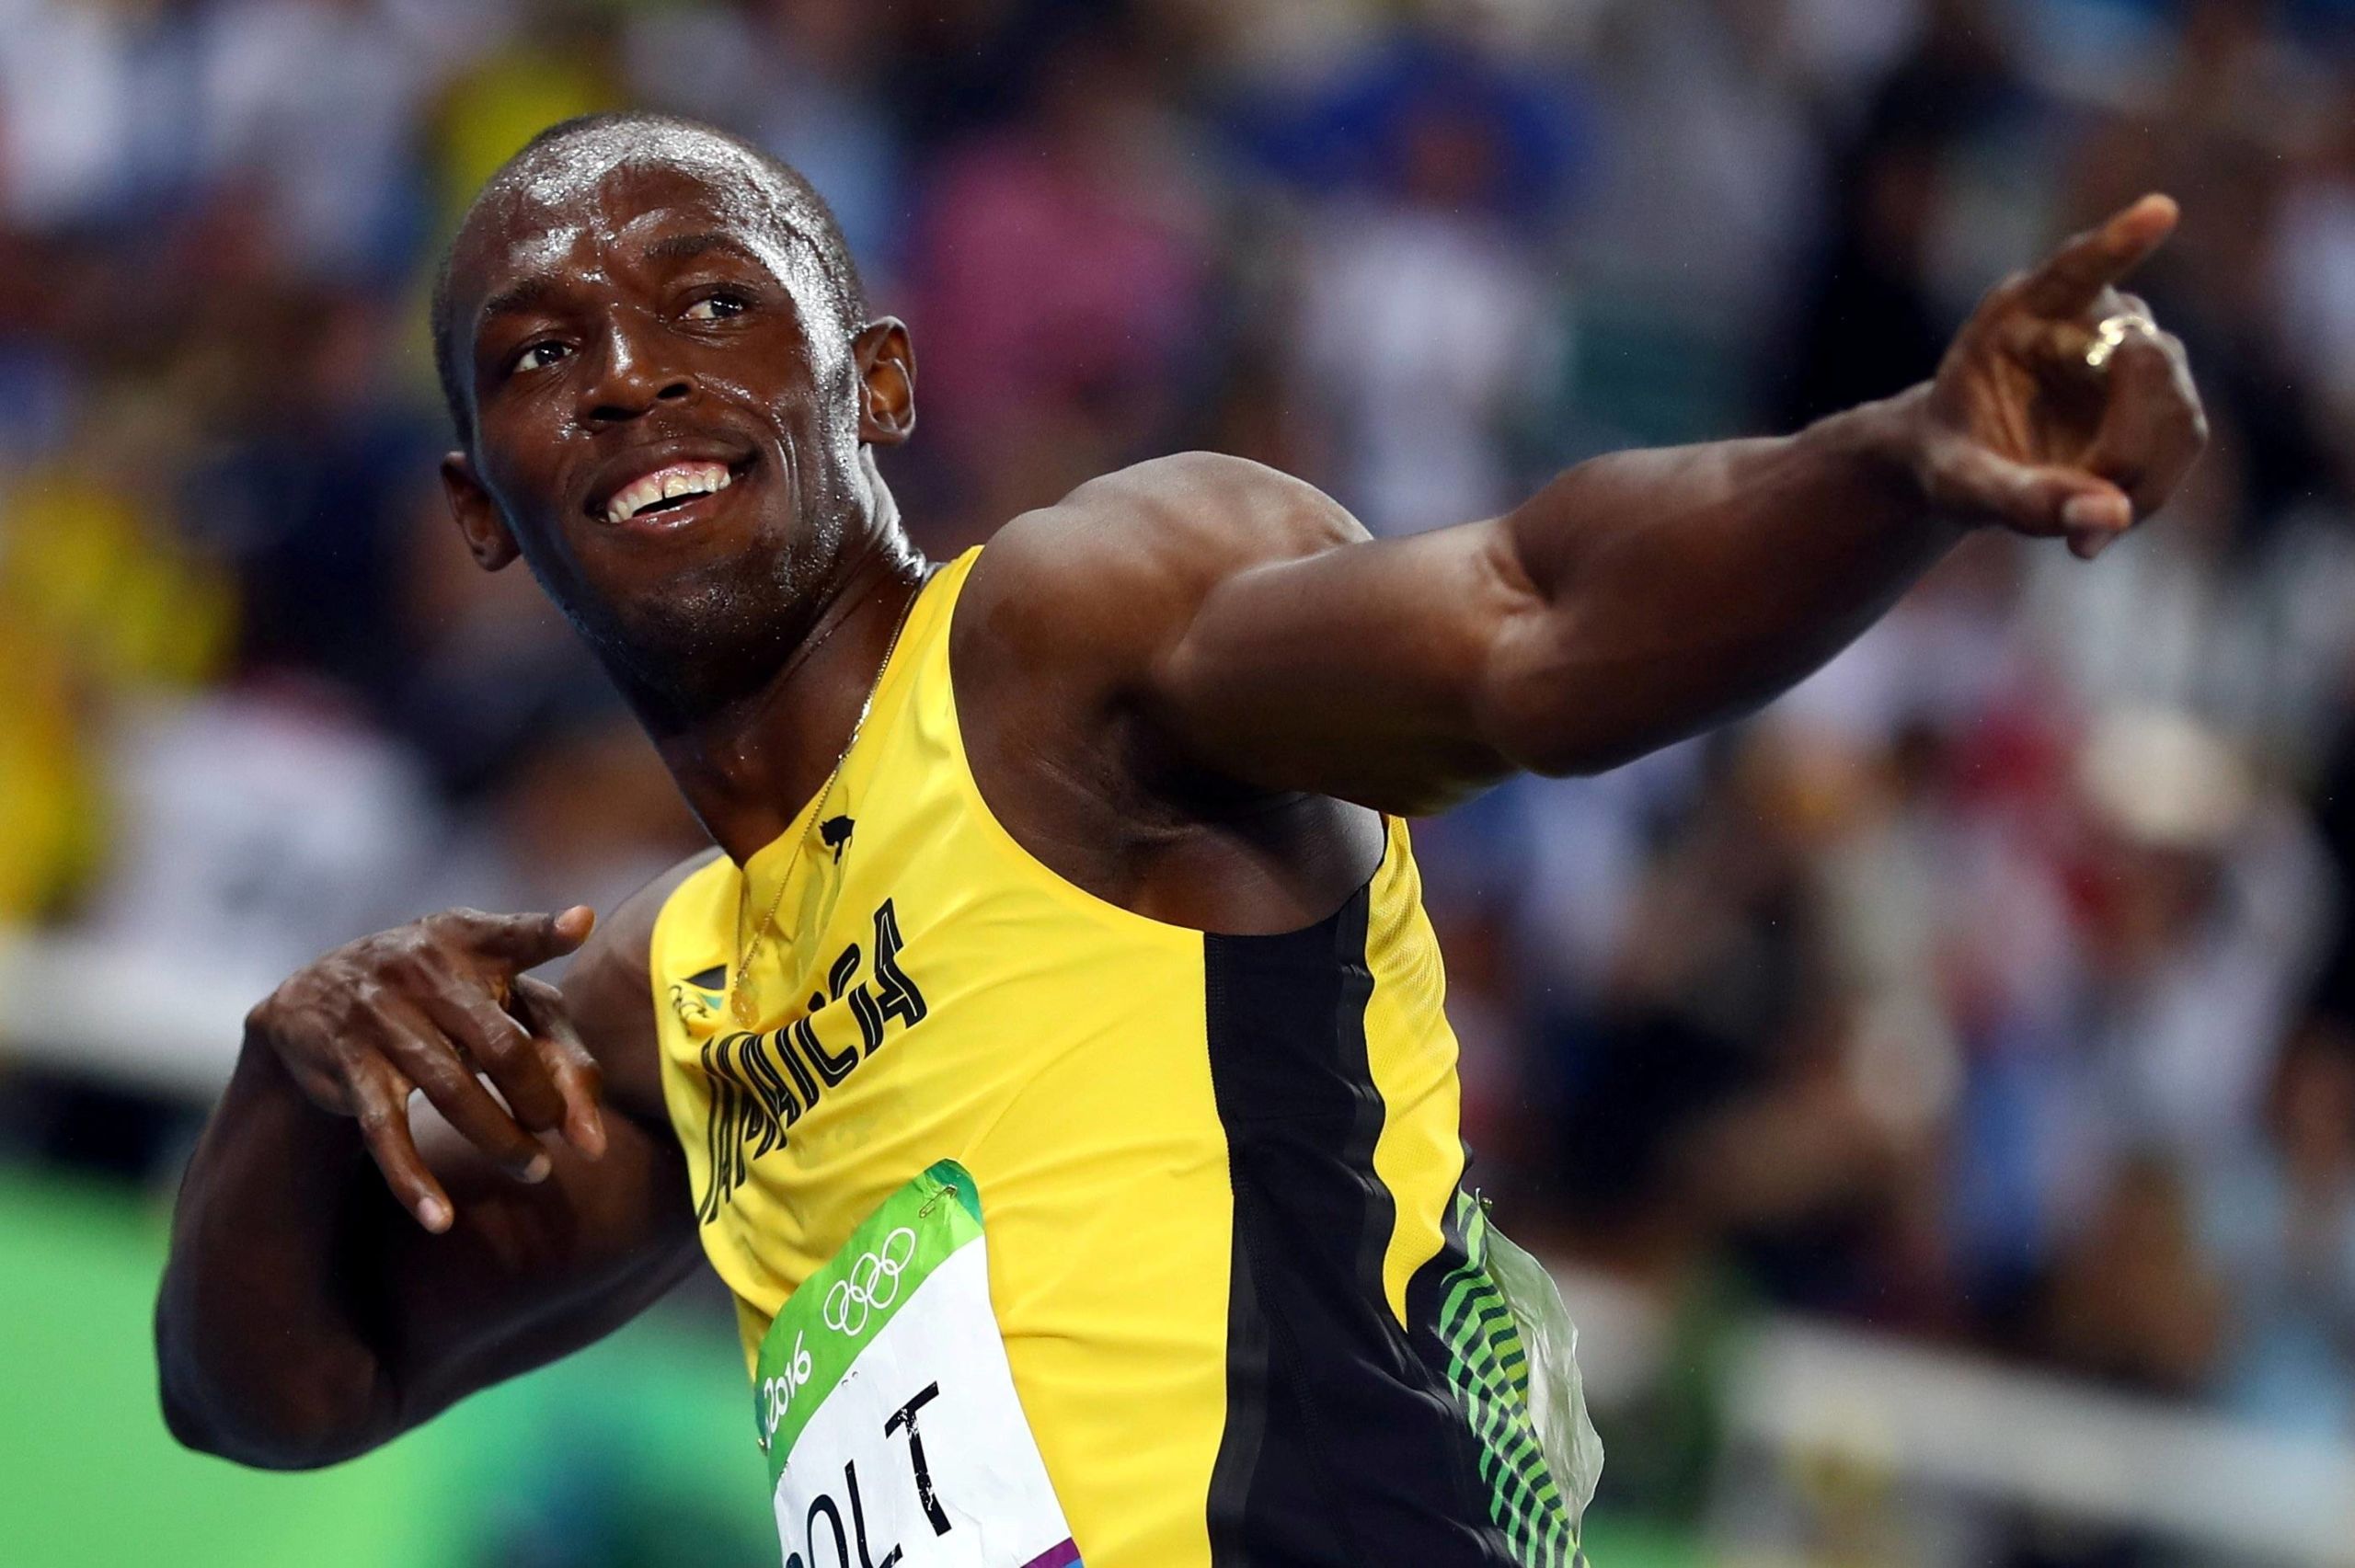 Eight-time Olympic track and field champion Usain Bolt named the teams he supports for the 2022 World Championships in Qatar